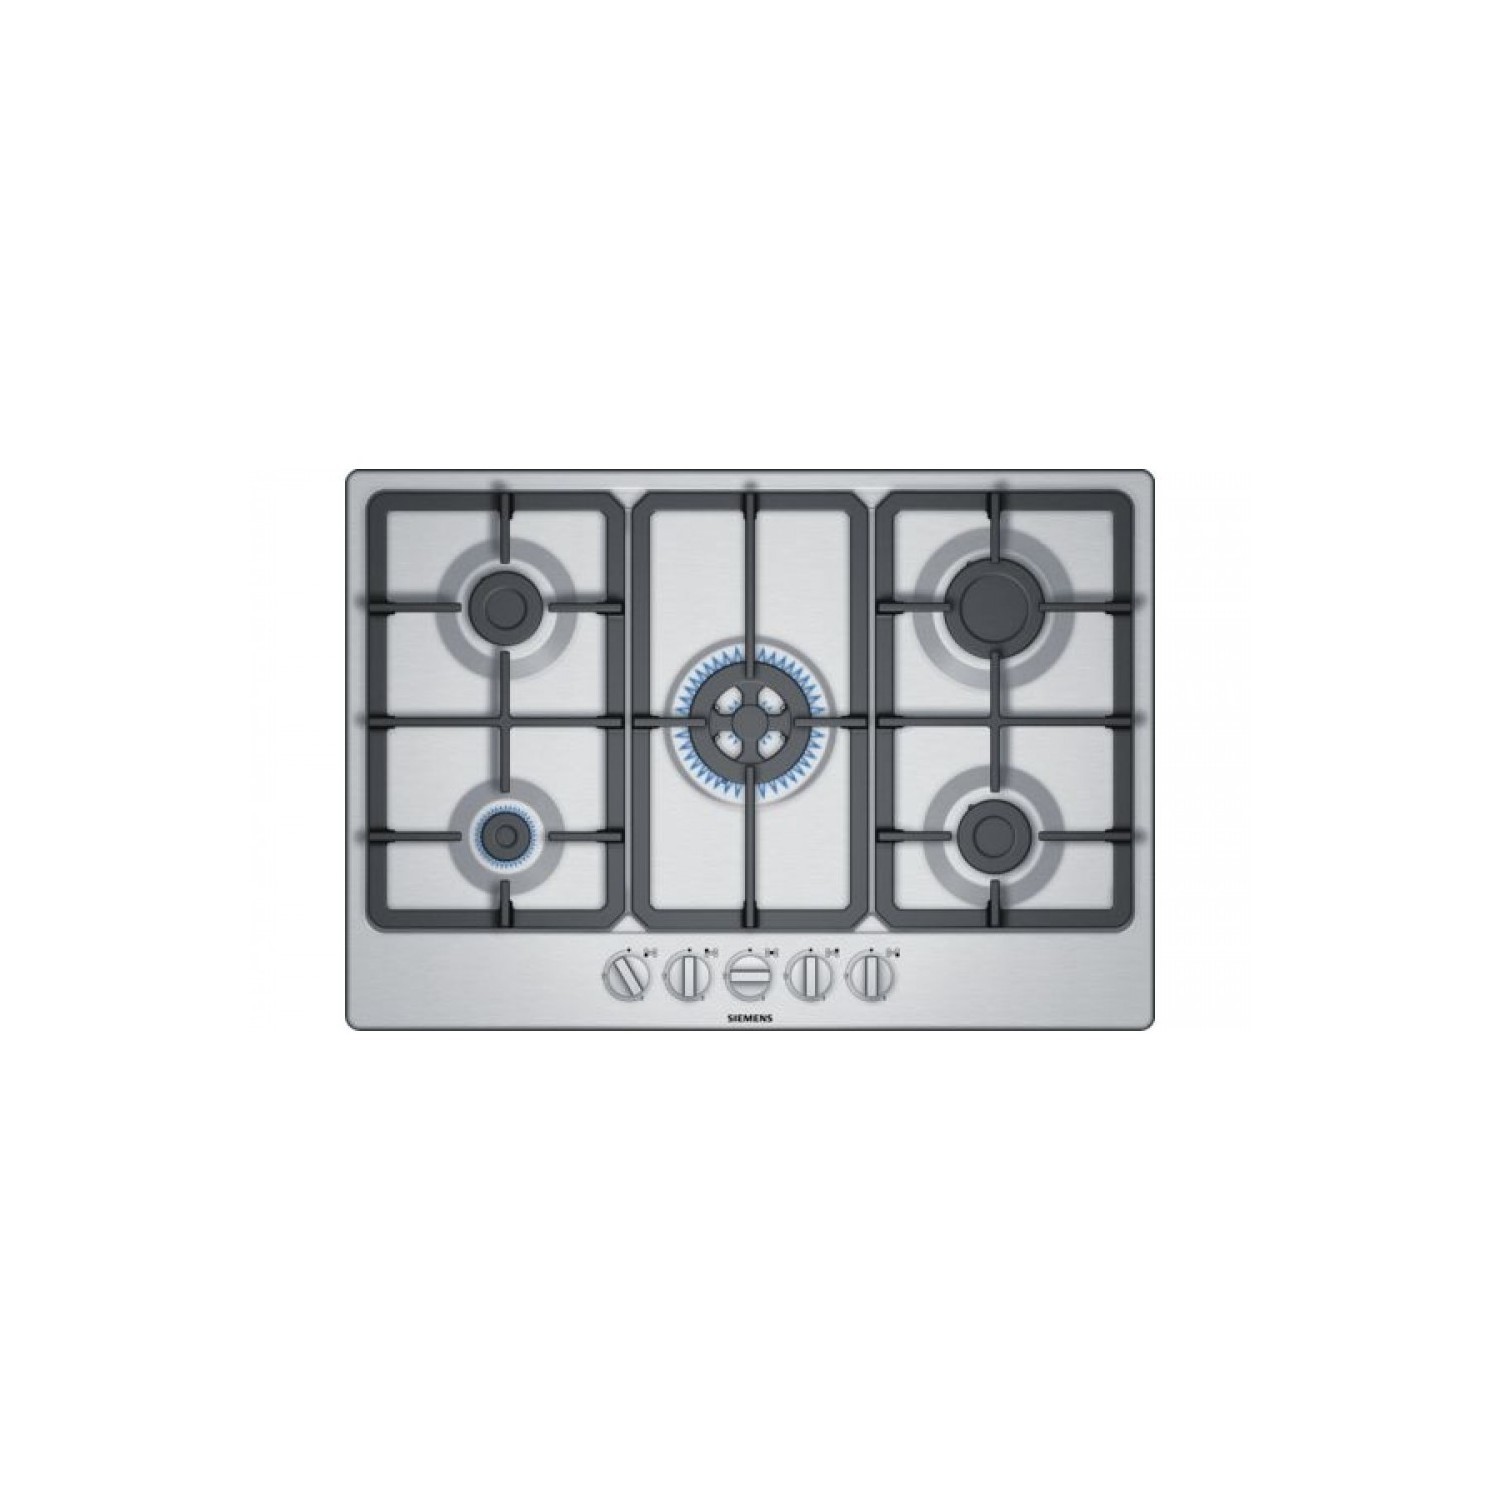 Refurbished Siemens iQ300 EG7B5QB90 75cm Gas Hob With Cast Iron Pan Stands Stainless Steel